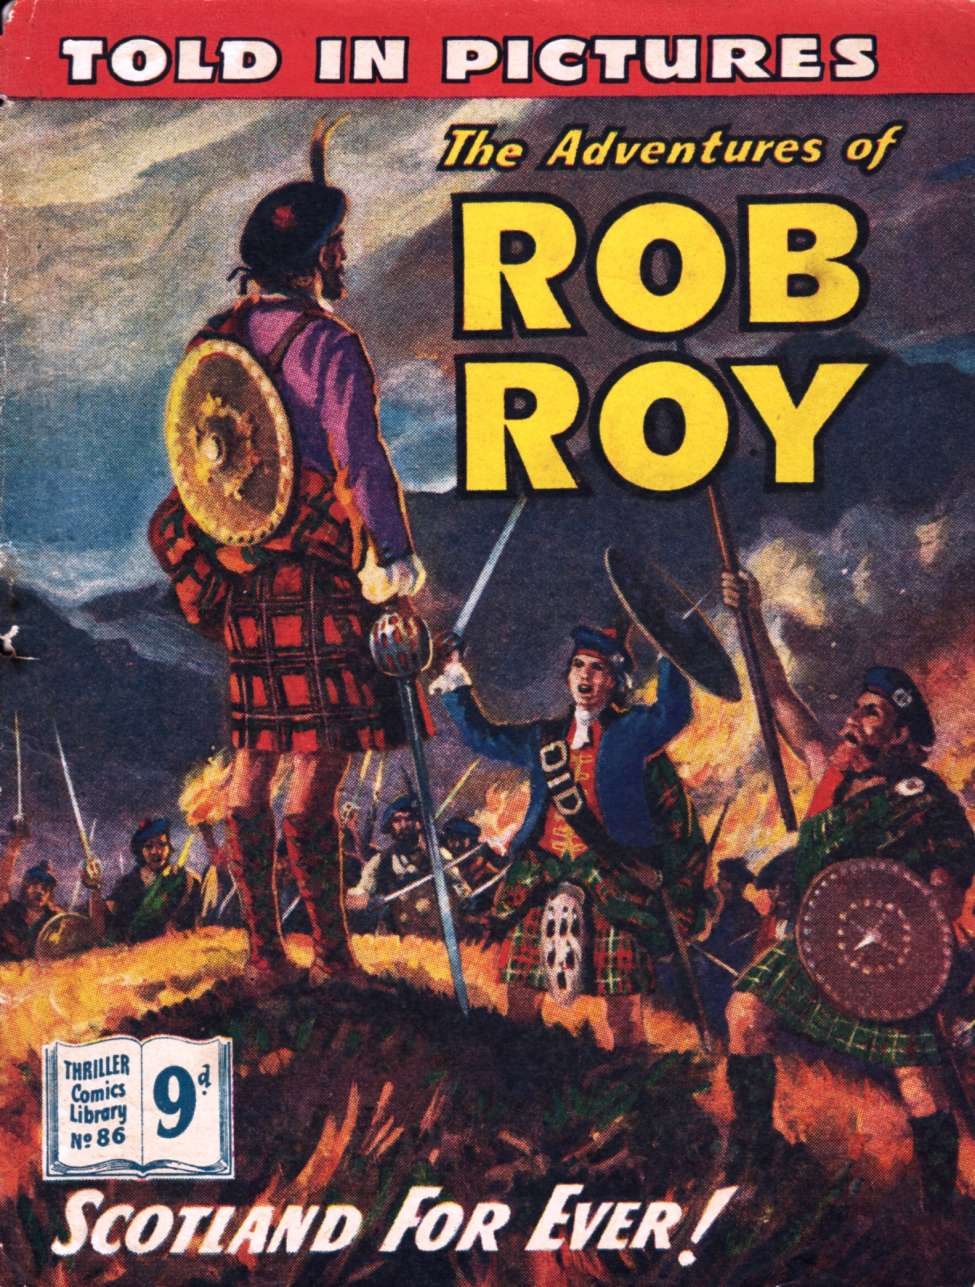 Book Cover For Thriller Comics Library 86 - The Adventures of Rob Roy